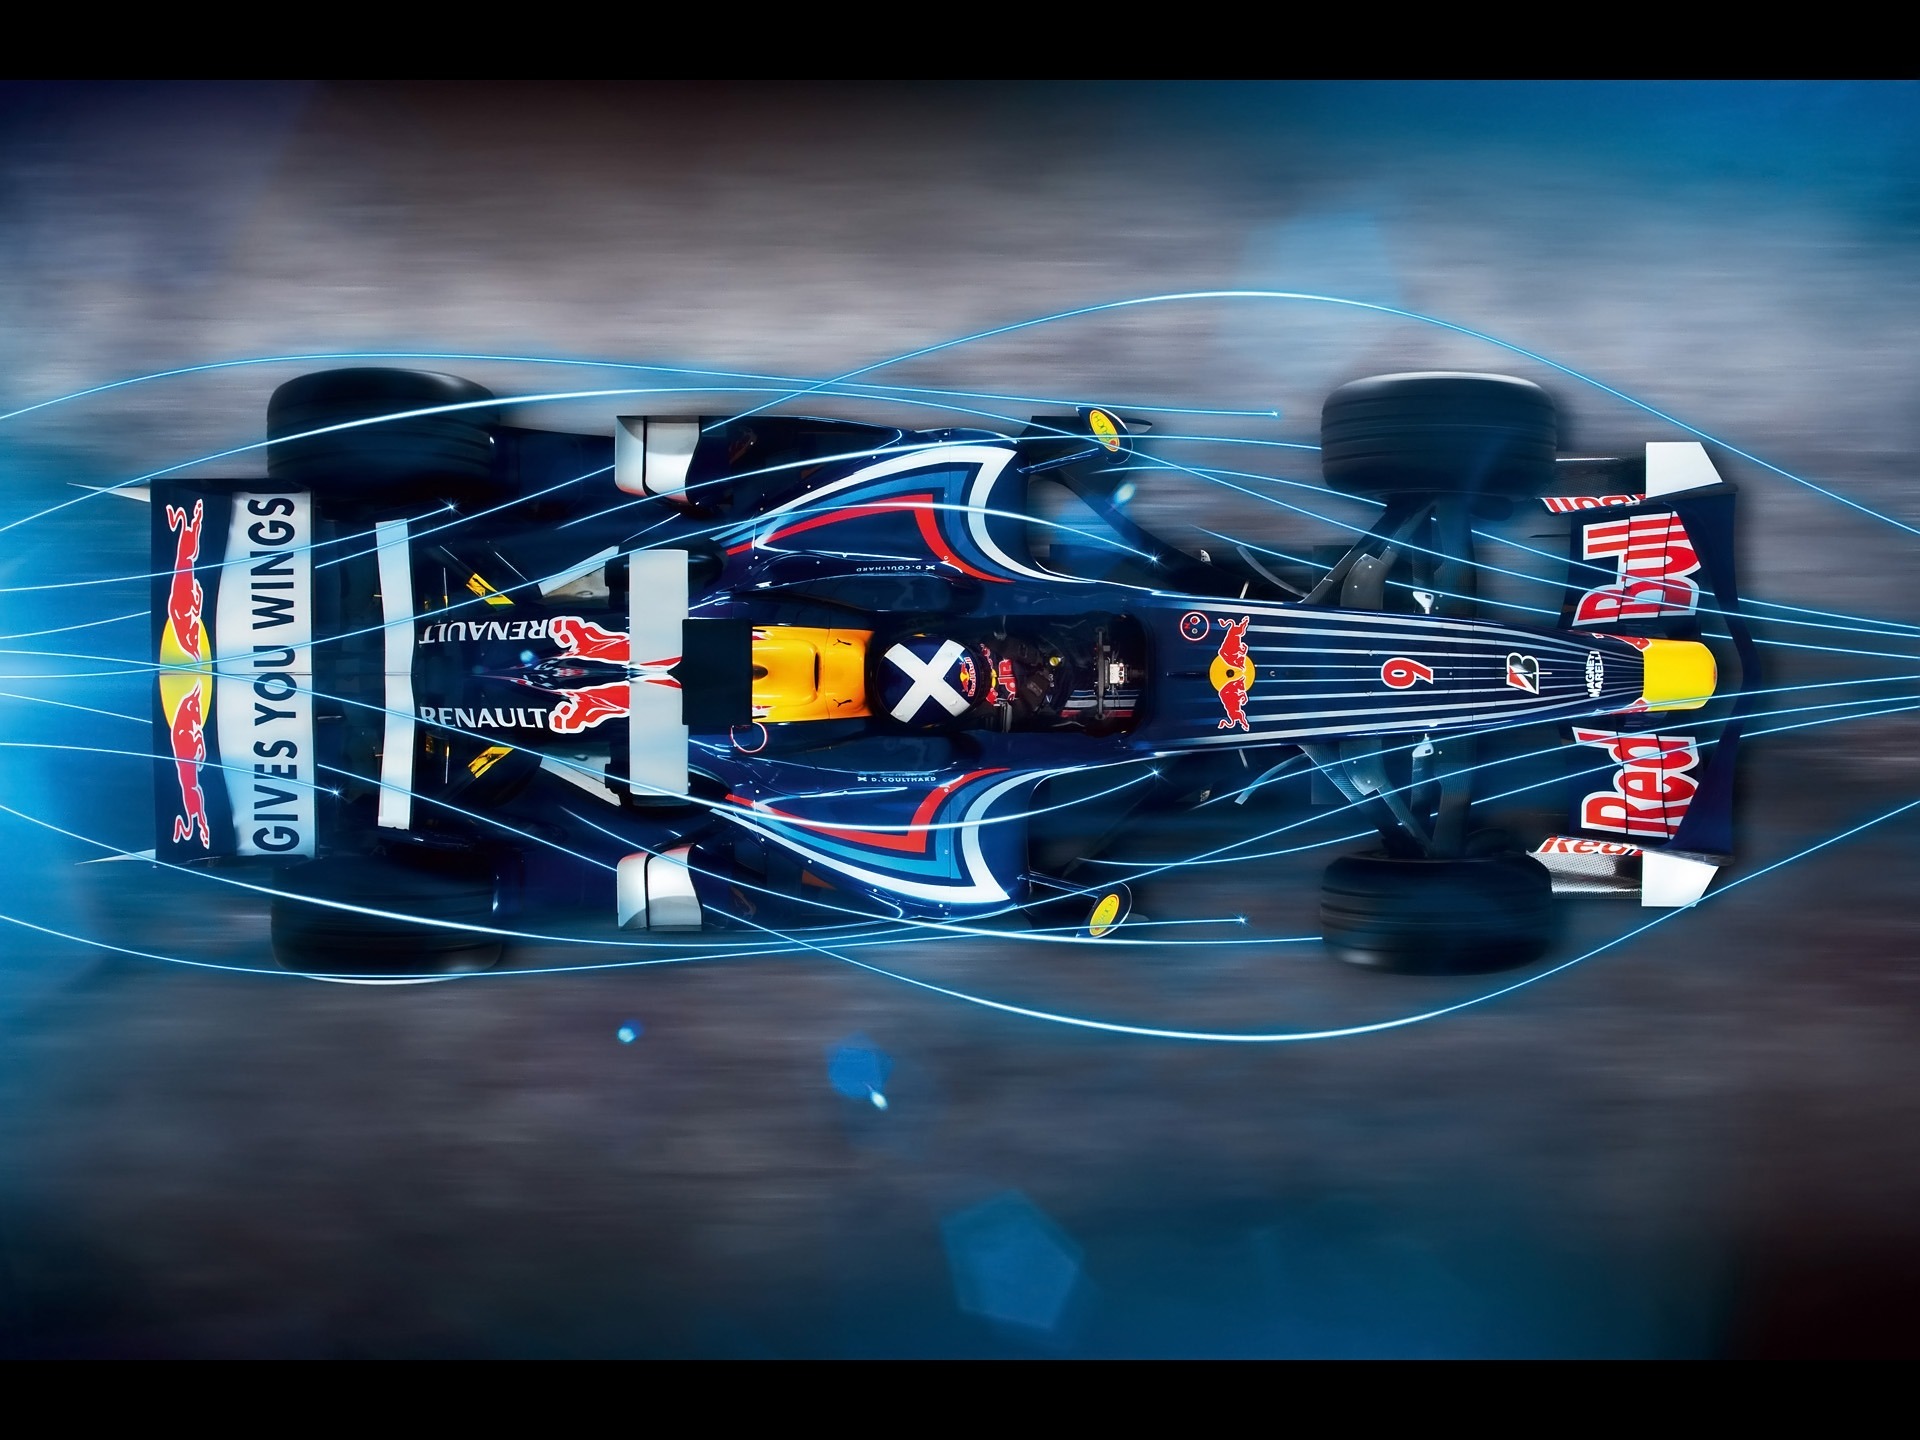 Red Bull Rb4 F1 Wallpaper Formula 1 Cars Wallpapers In Jpg Format For Free Download